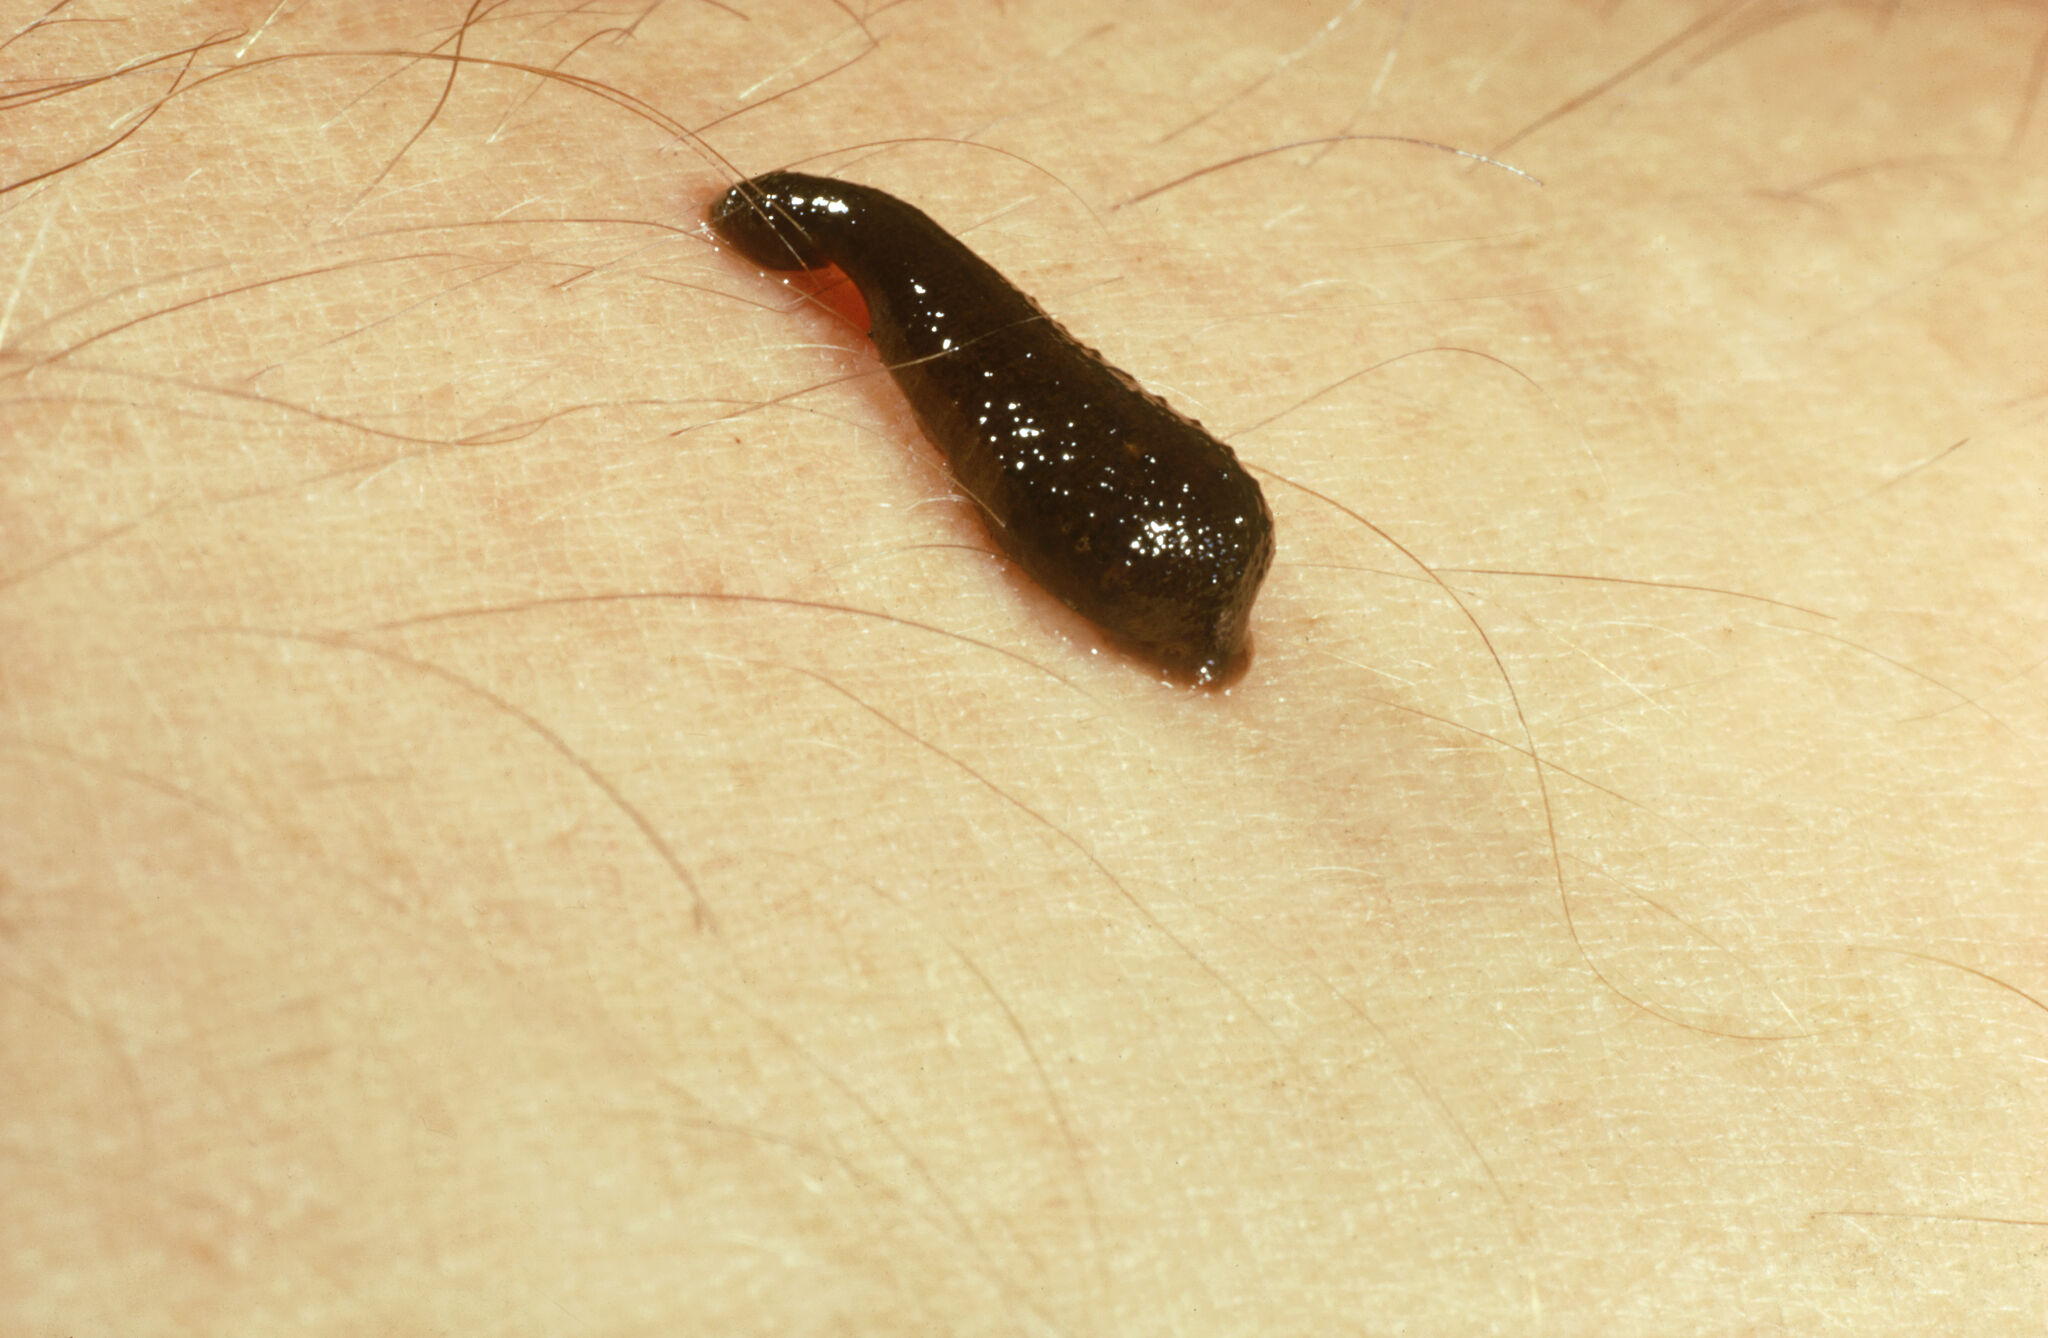 Leeches are most active during hot days. Here's what to do.